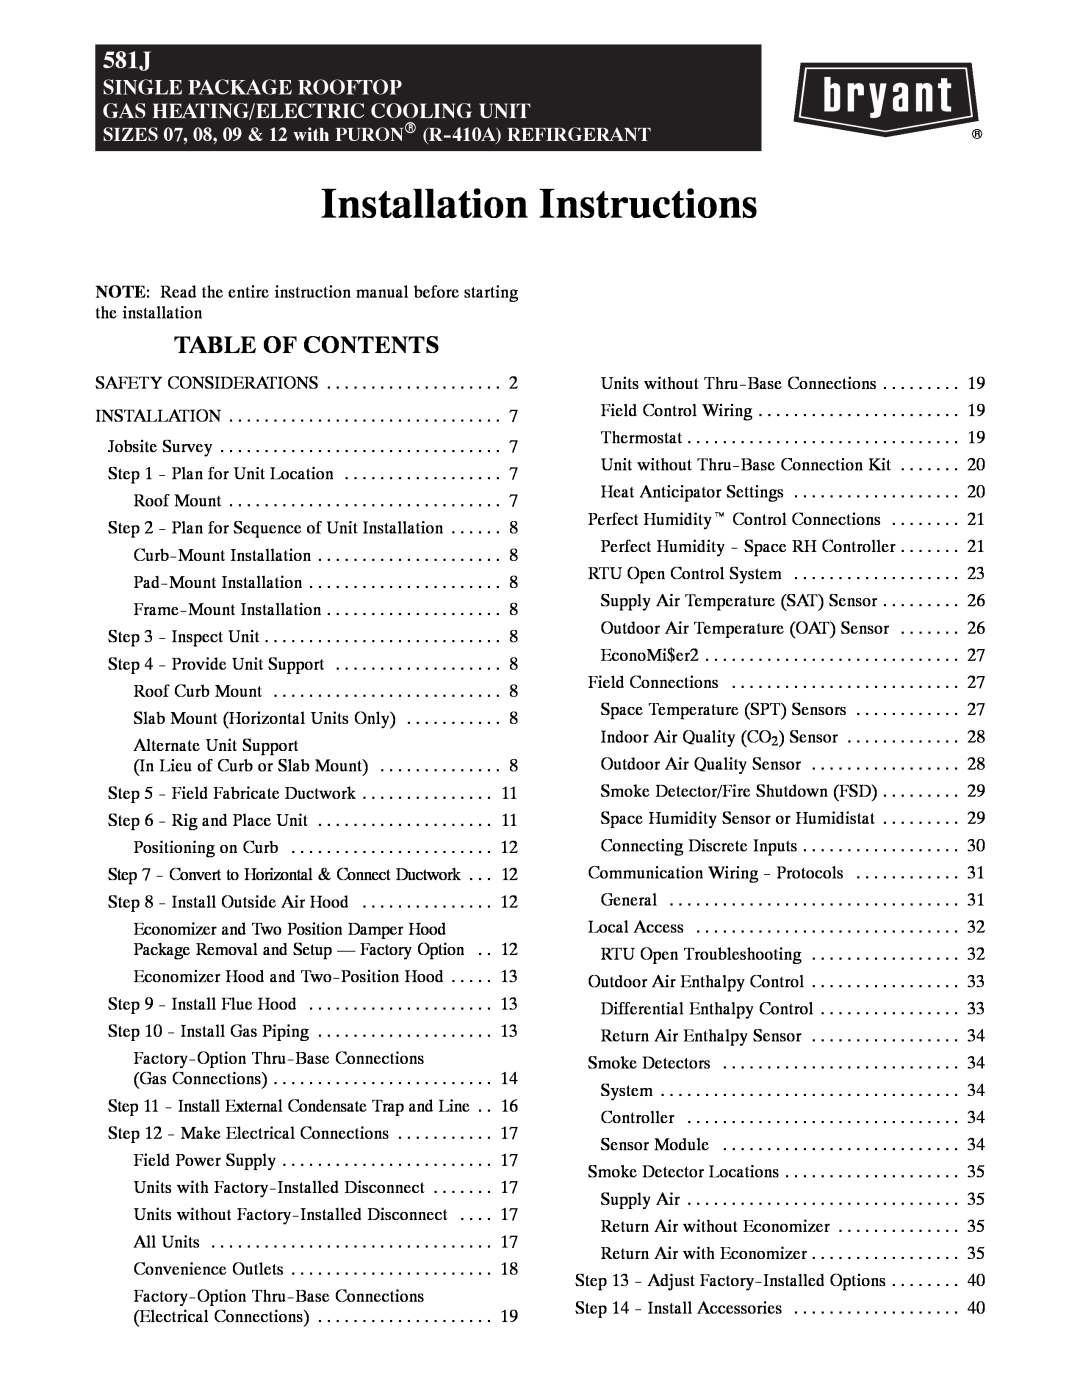 Bryant 581J installation instructions Table Of Contents, Installation Instructions, Single Package Rooftop 